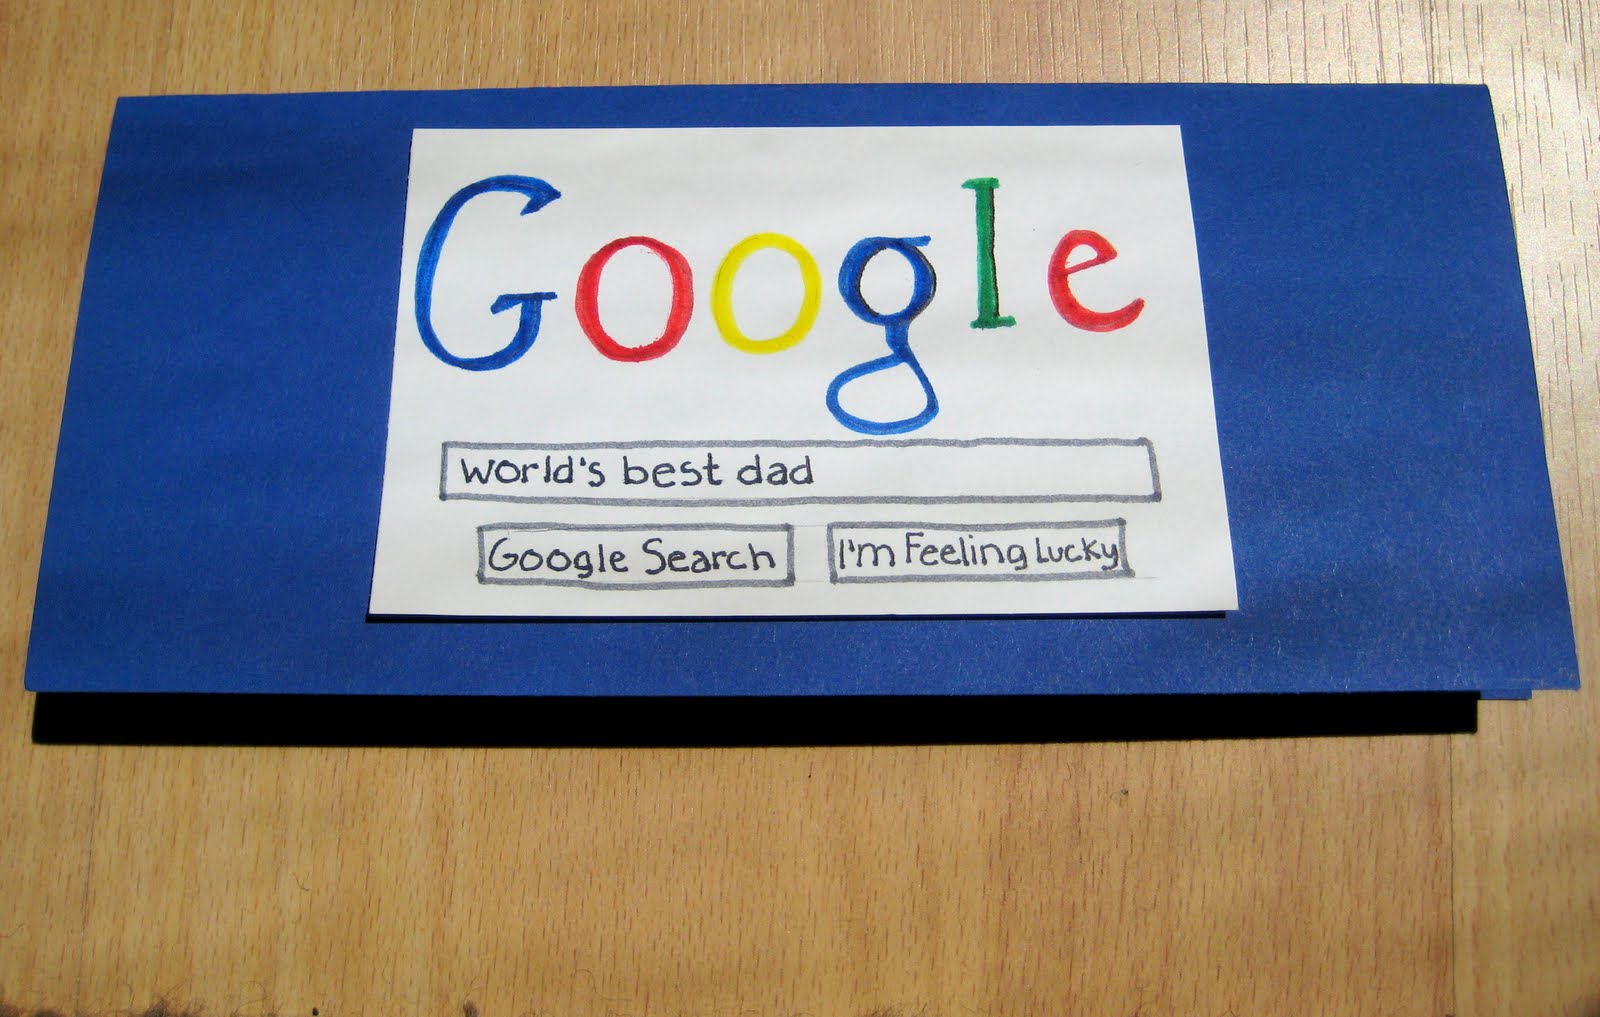 preschool-crafts-for-kids-father-s-day-google-card-craft